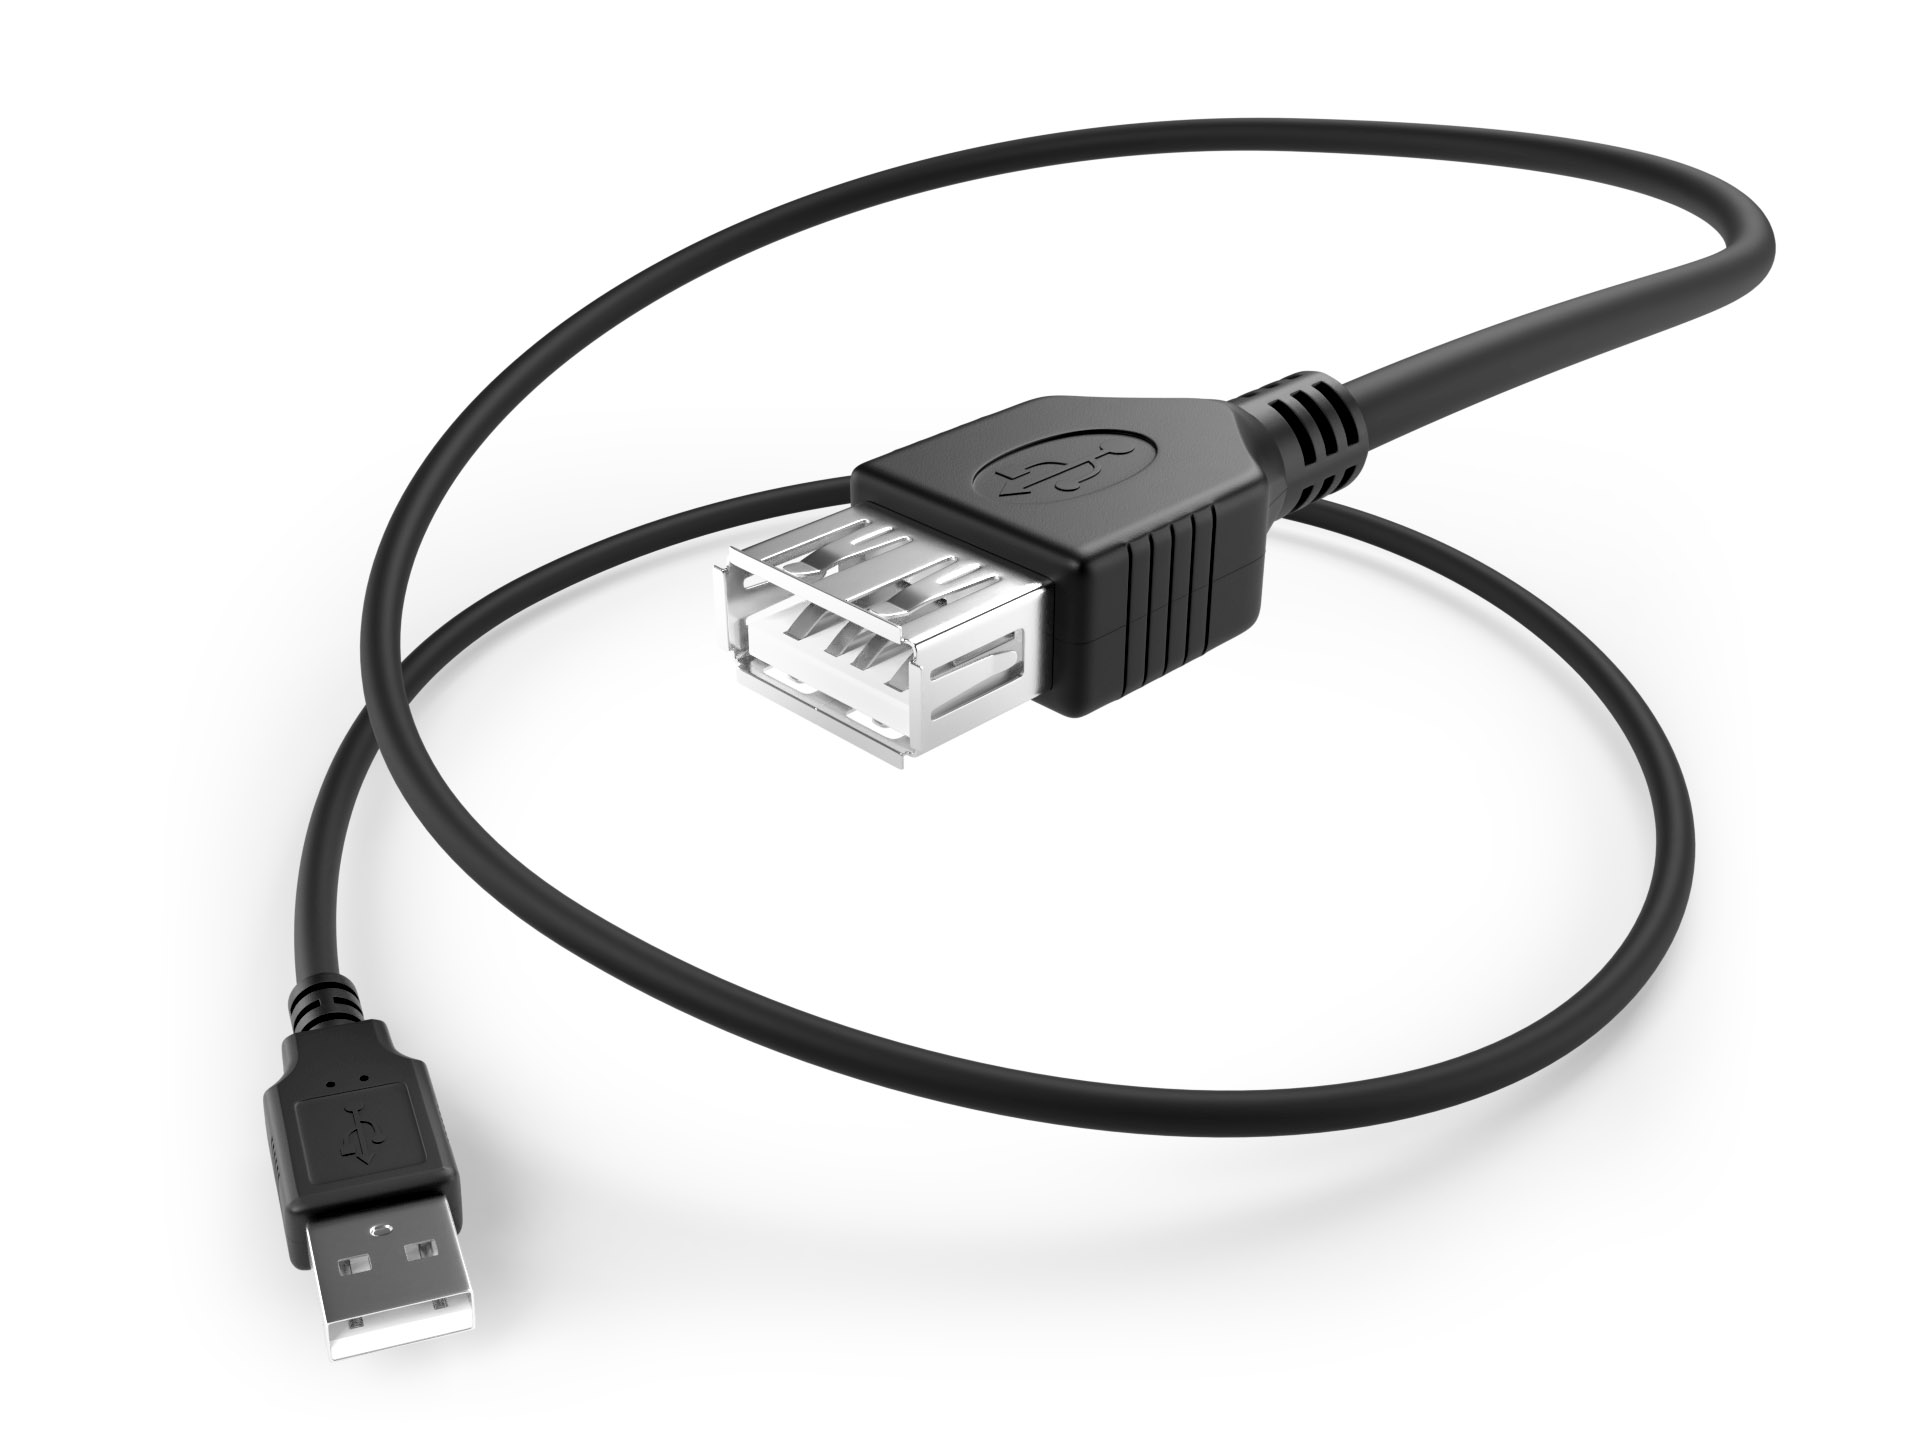 image of a USB A male to A female cable